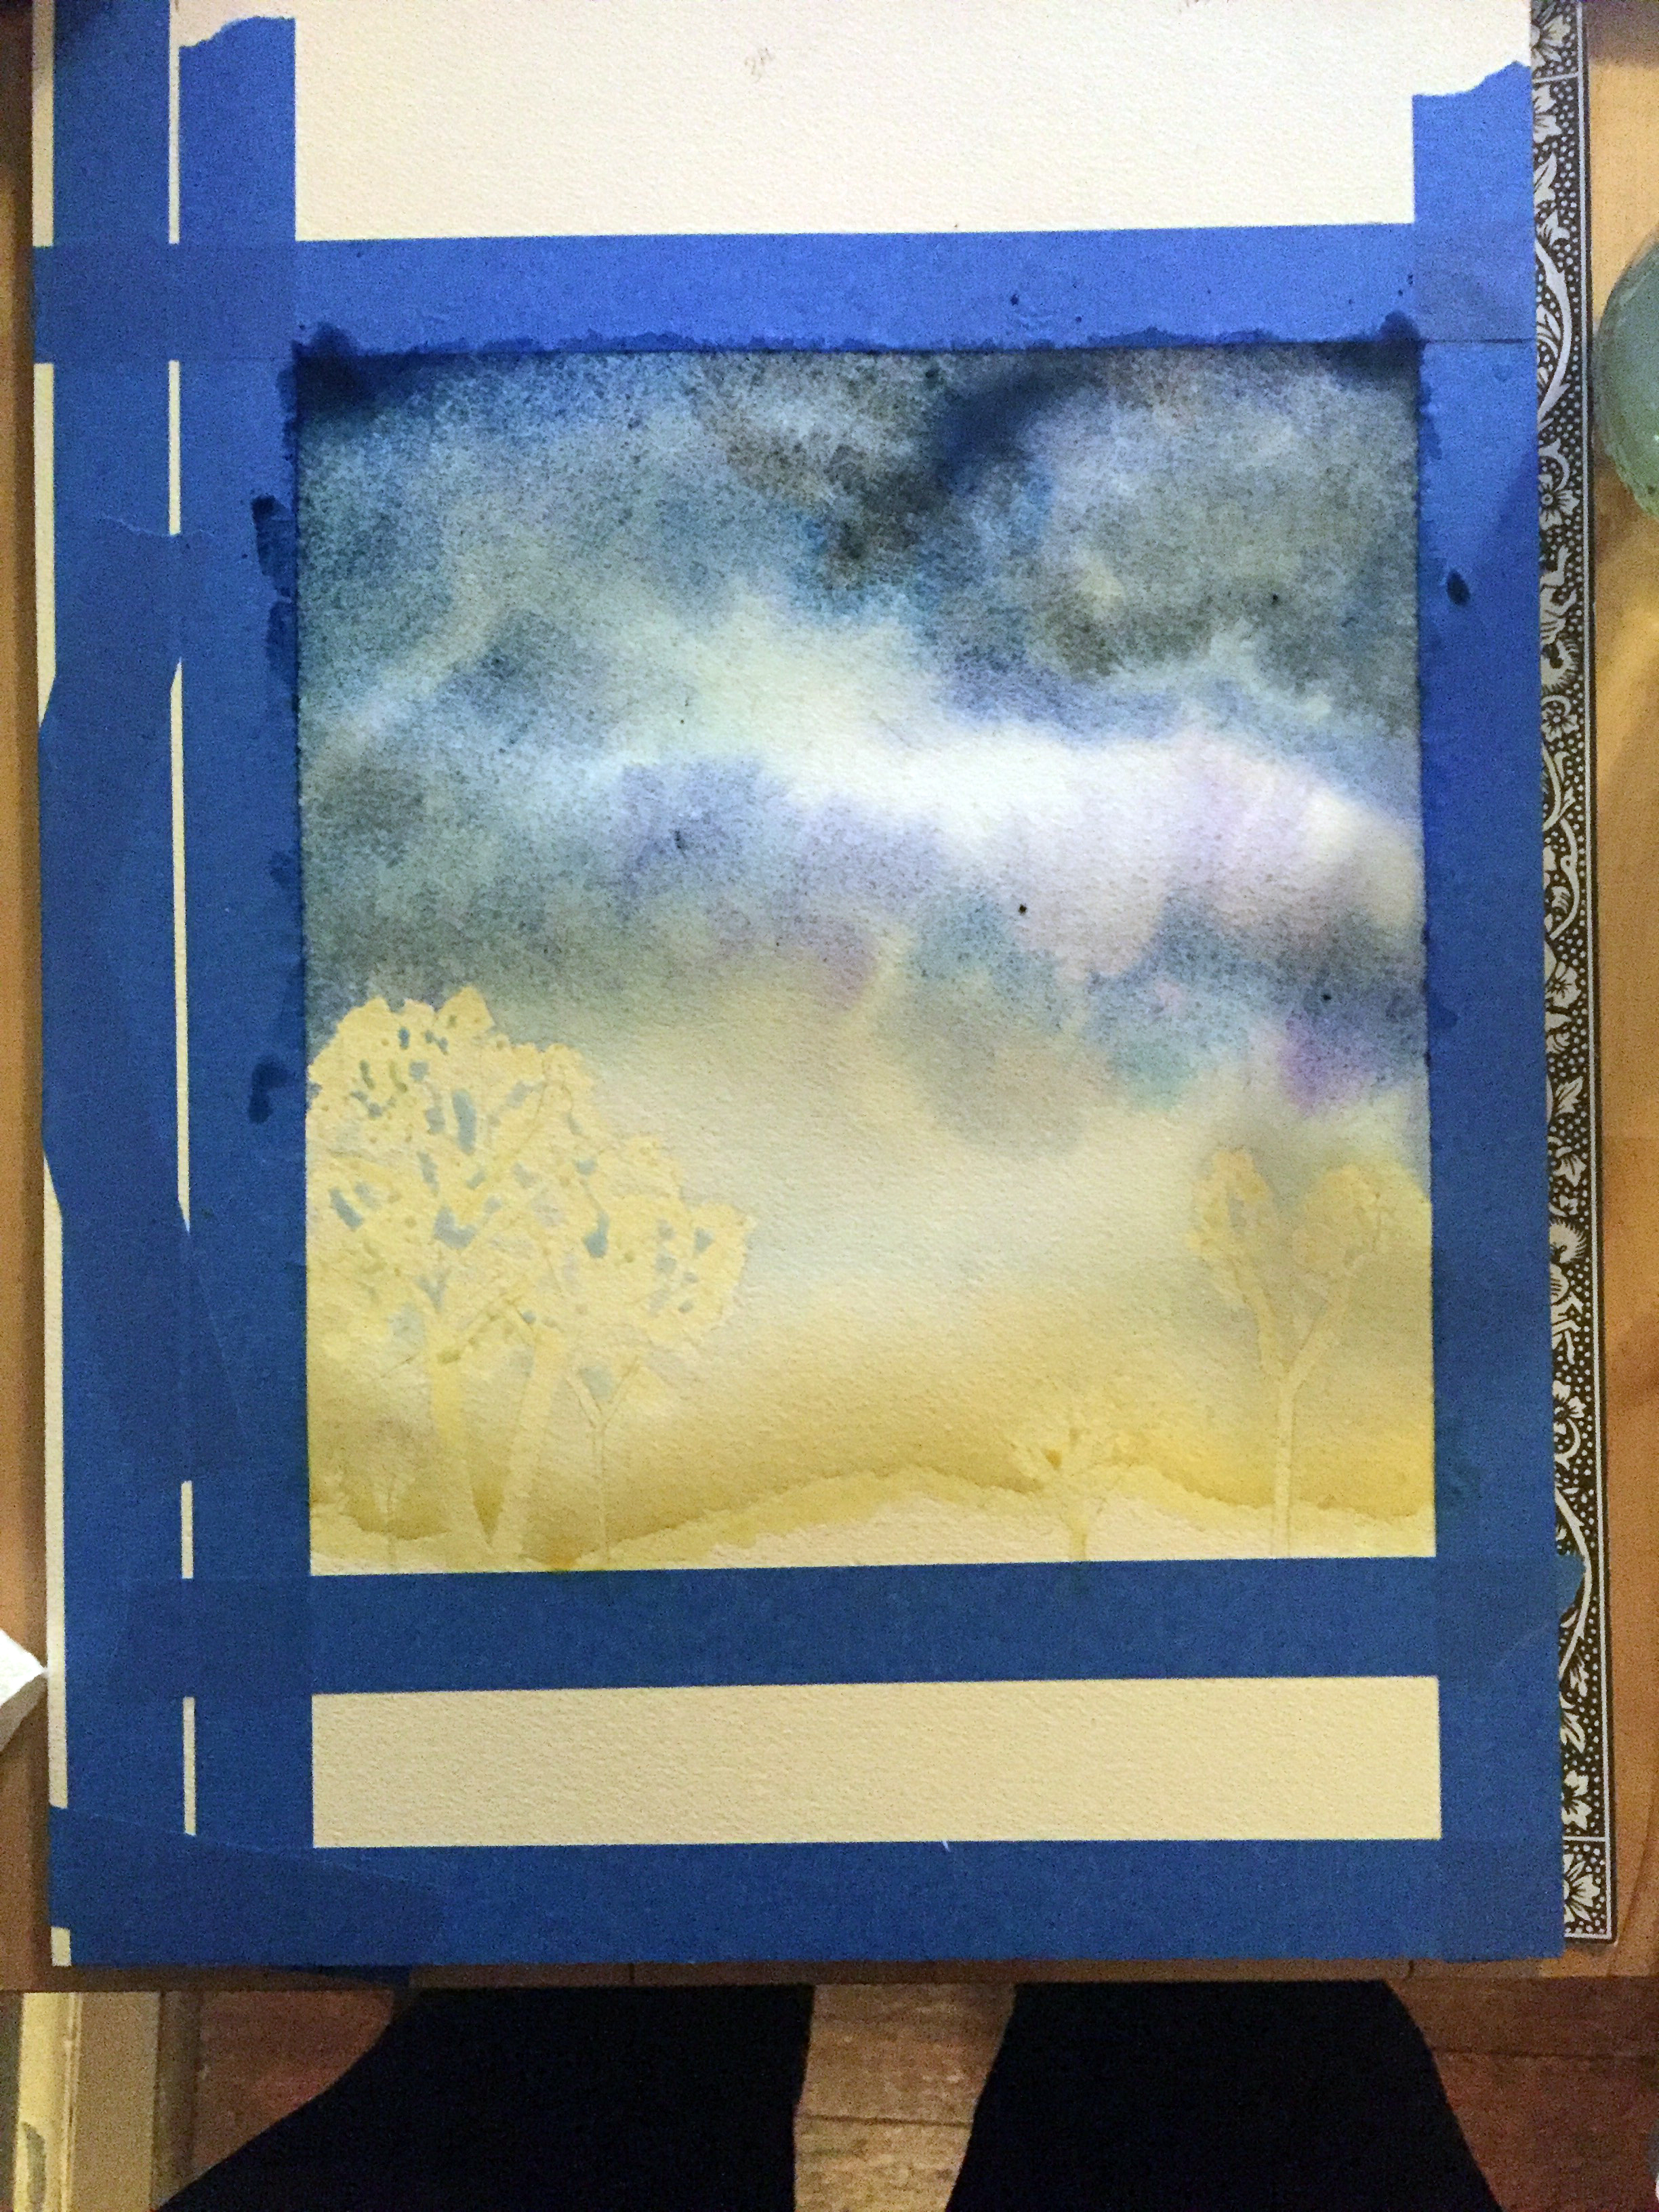  Step 1: Apply masking fluid &amp; begin painting the sky 